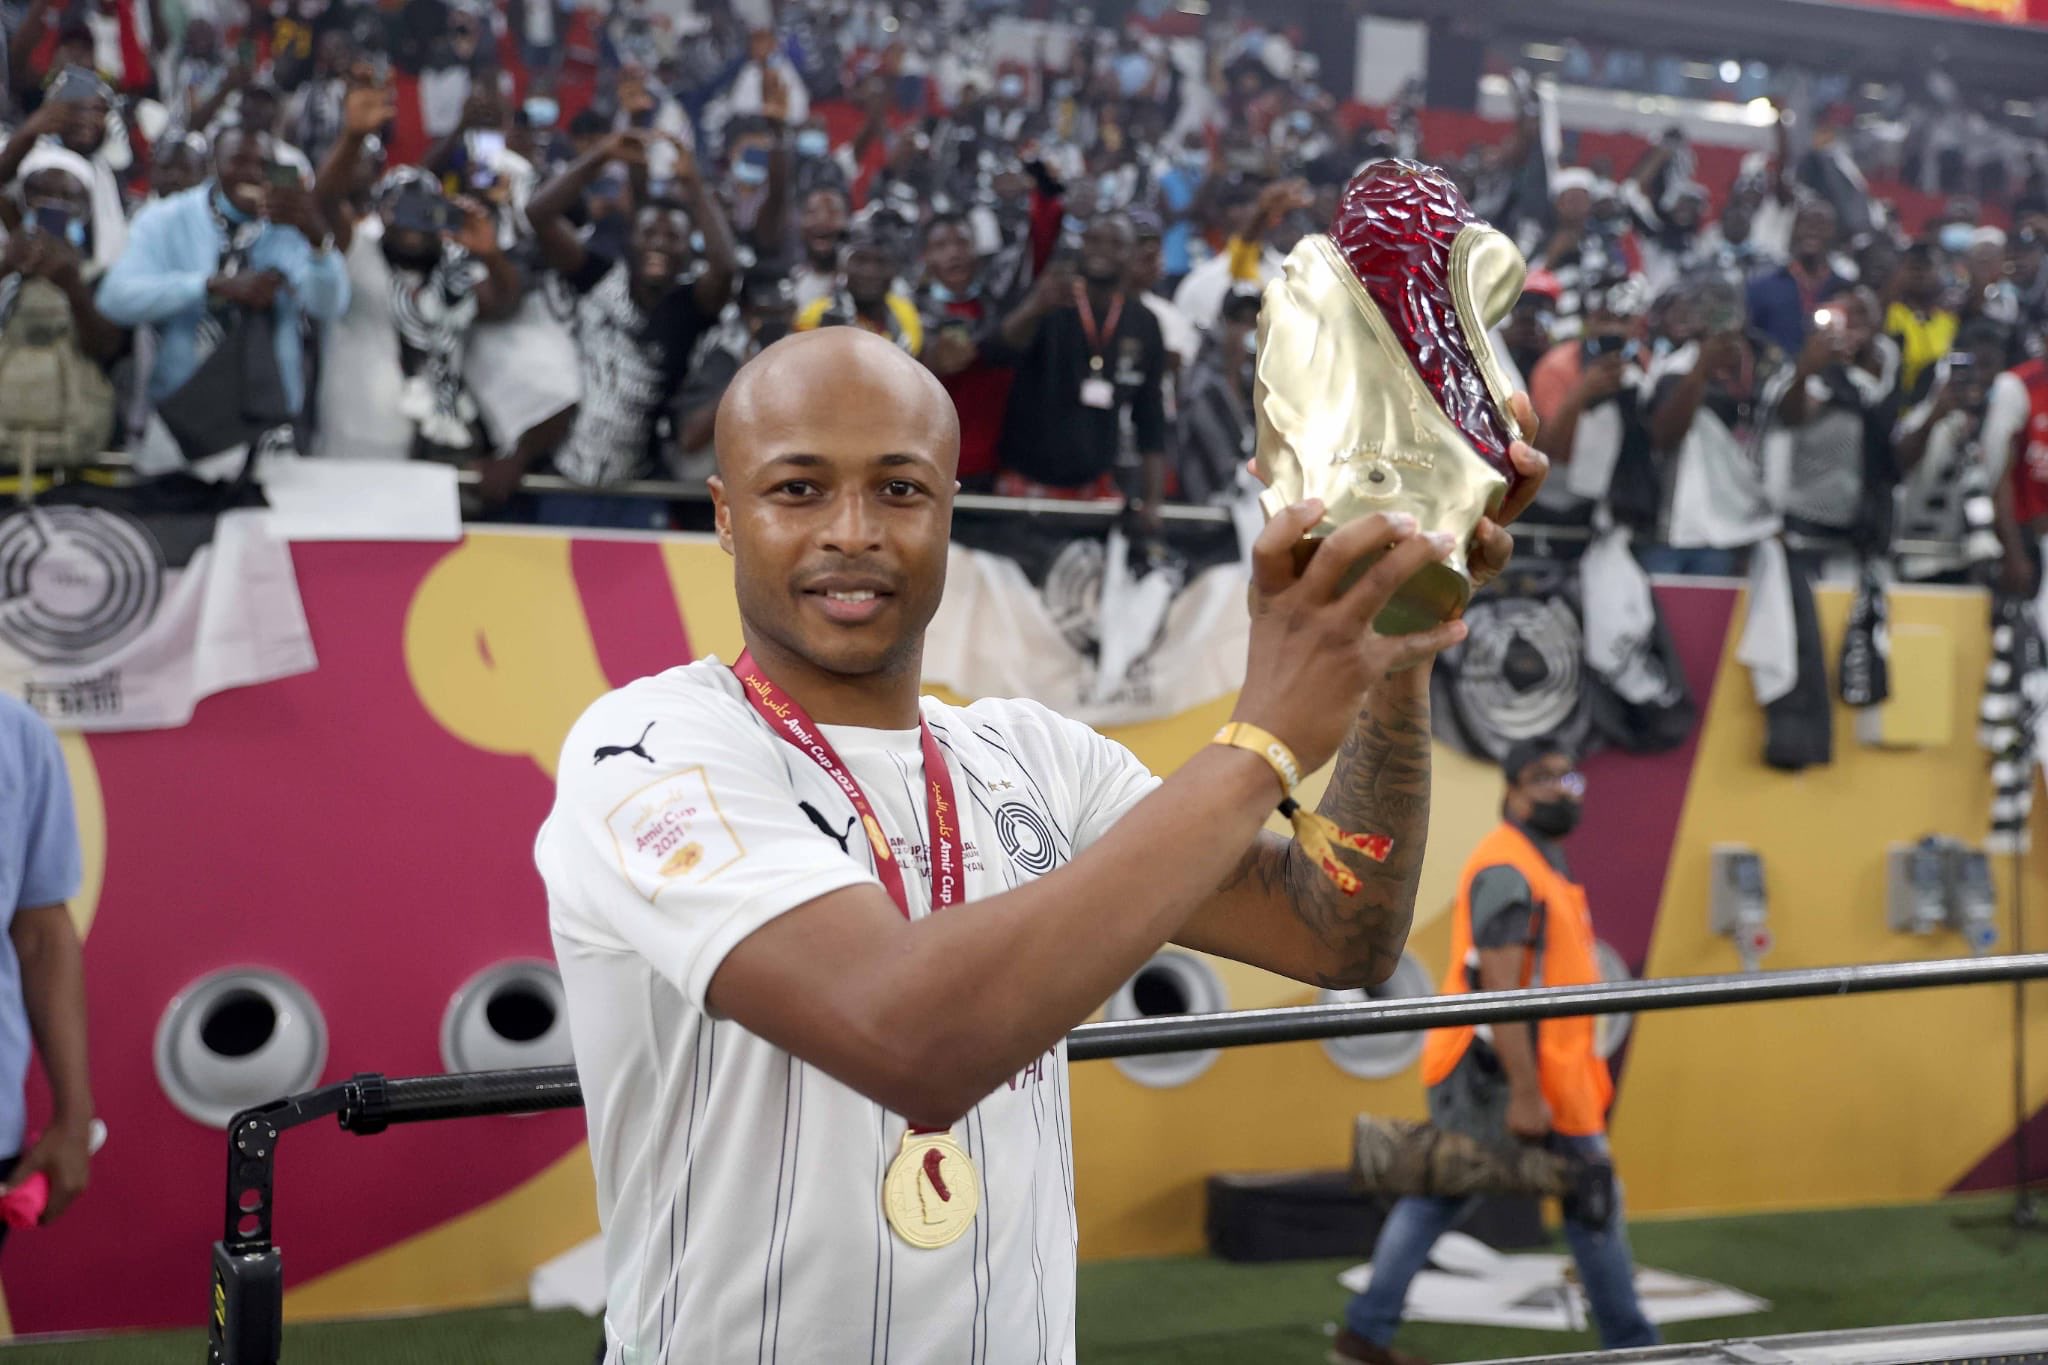 Ghana forward Andre Ayew target winning more trophies with Al Sadd after Emir Cup triumph